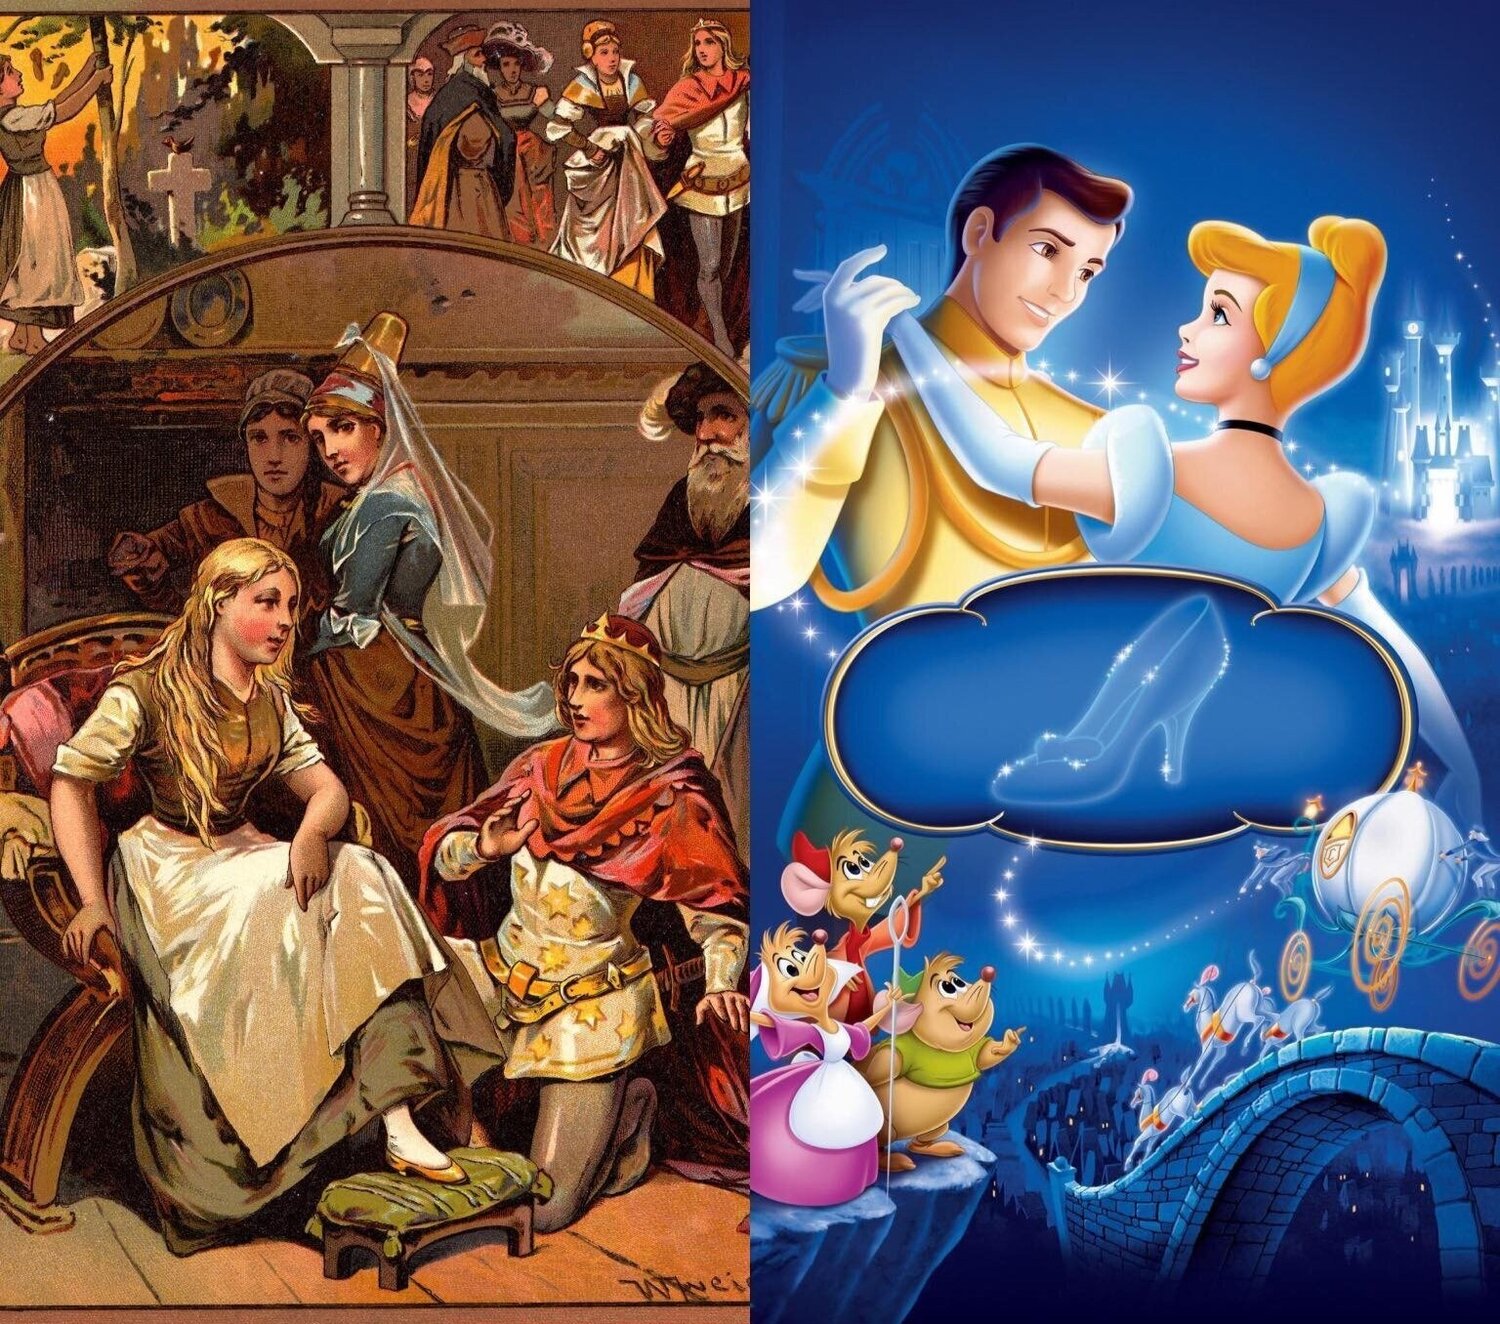 The Oldest Disney Adapted Fairy Tale — The Disney Classics